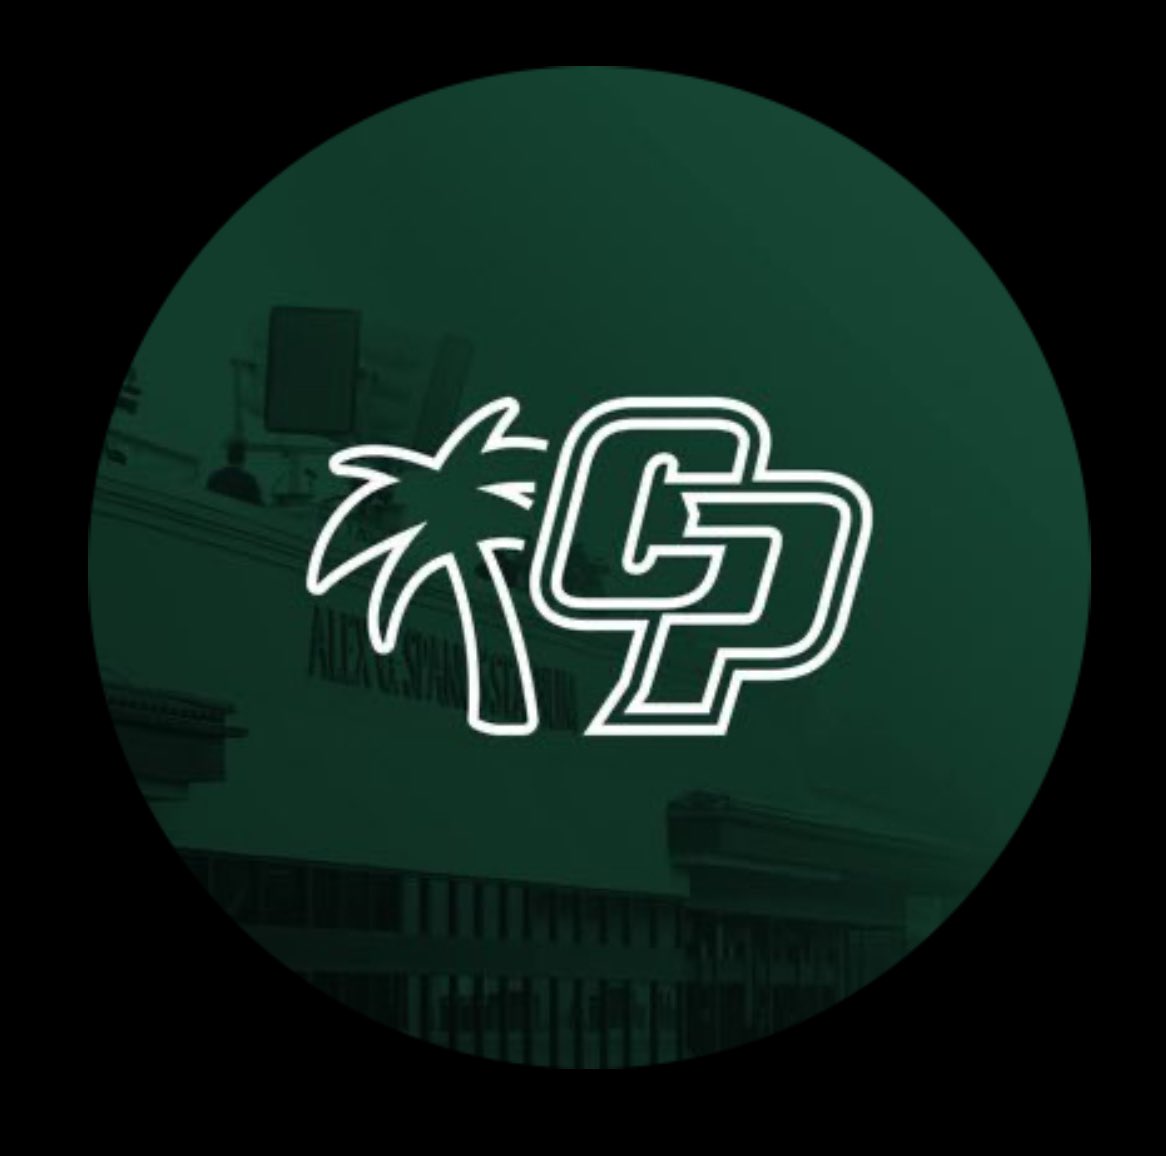 I’ll be back in SLO on Saturday for junior day. Can’t wait to see what @calpolyfootball has been up to this spring. #RideHigh @wesyerty24 @coachjmusky @JakeCasteel @E_Thompson92 @CoachJackCP @joshletuli @CoachWulff @CoachRyanPayne @WPlemons @Chris_Sailer @jc_kicks17 @CoachPapin